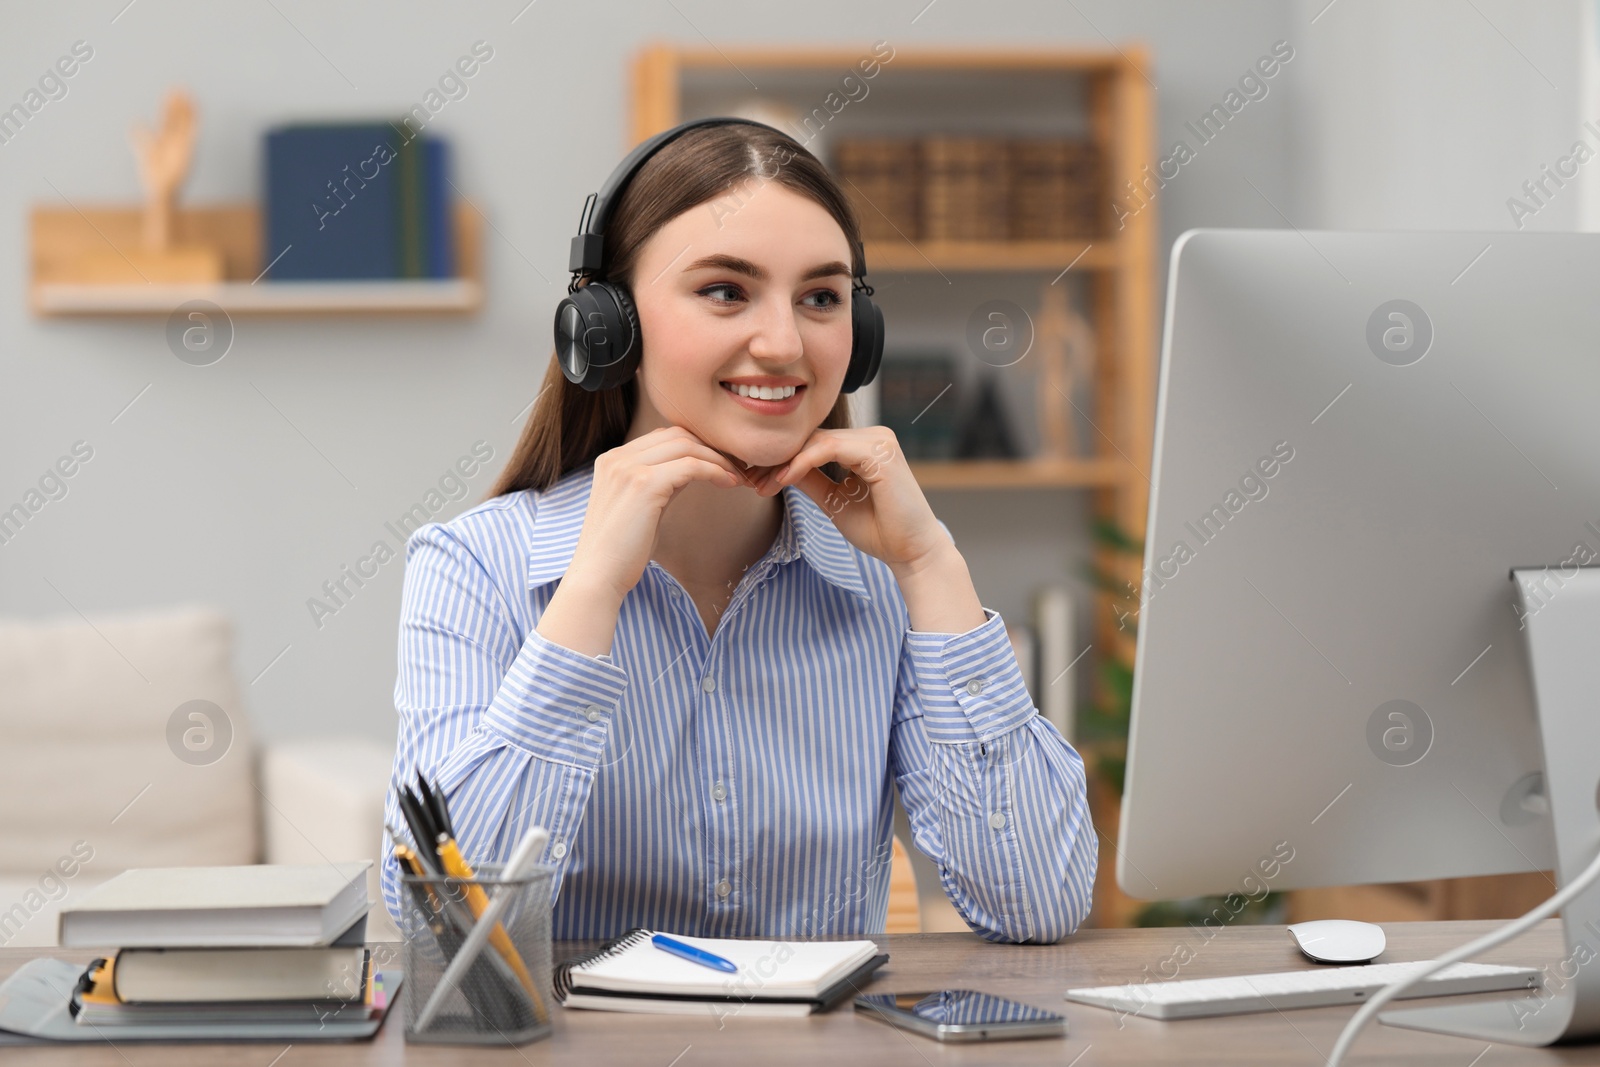 Photo of E-learning. Young woman using computer during online lesson at table indoors